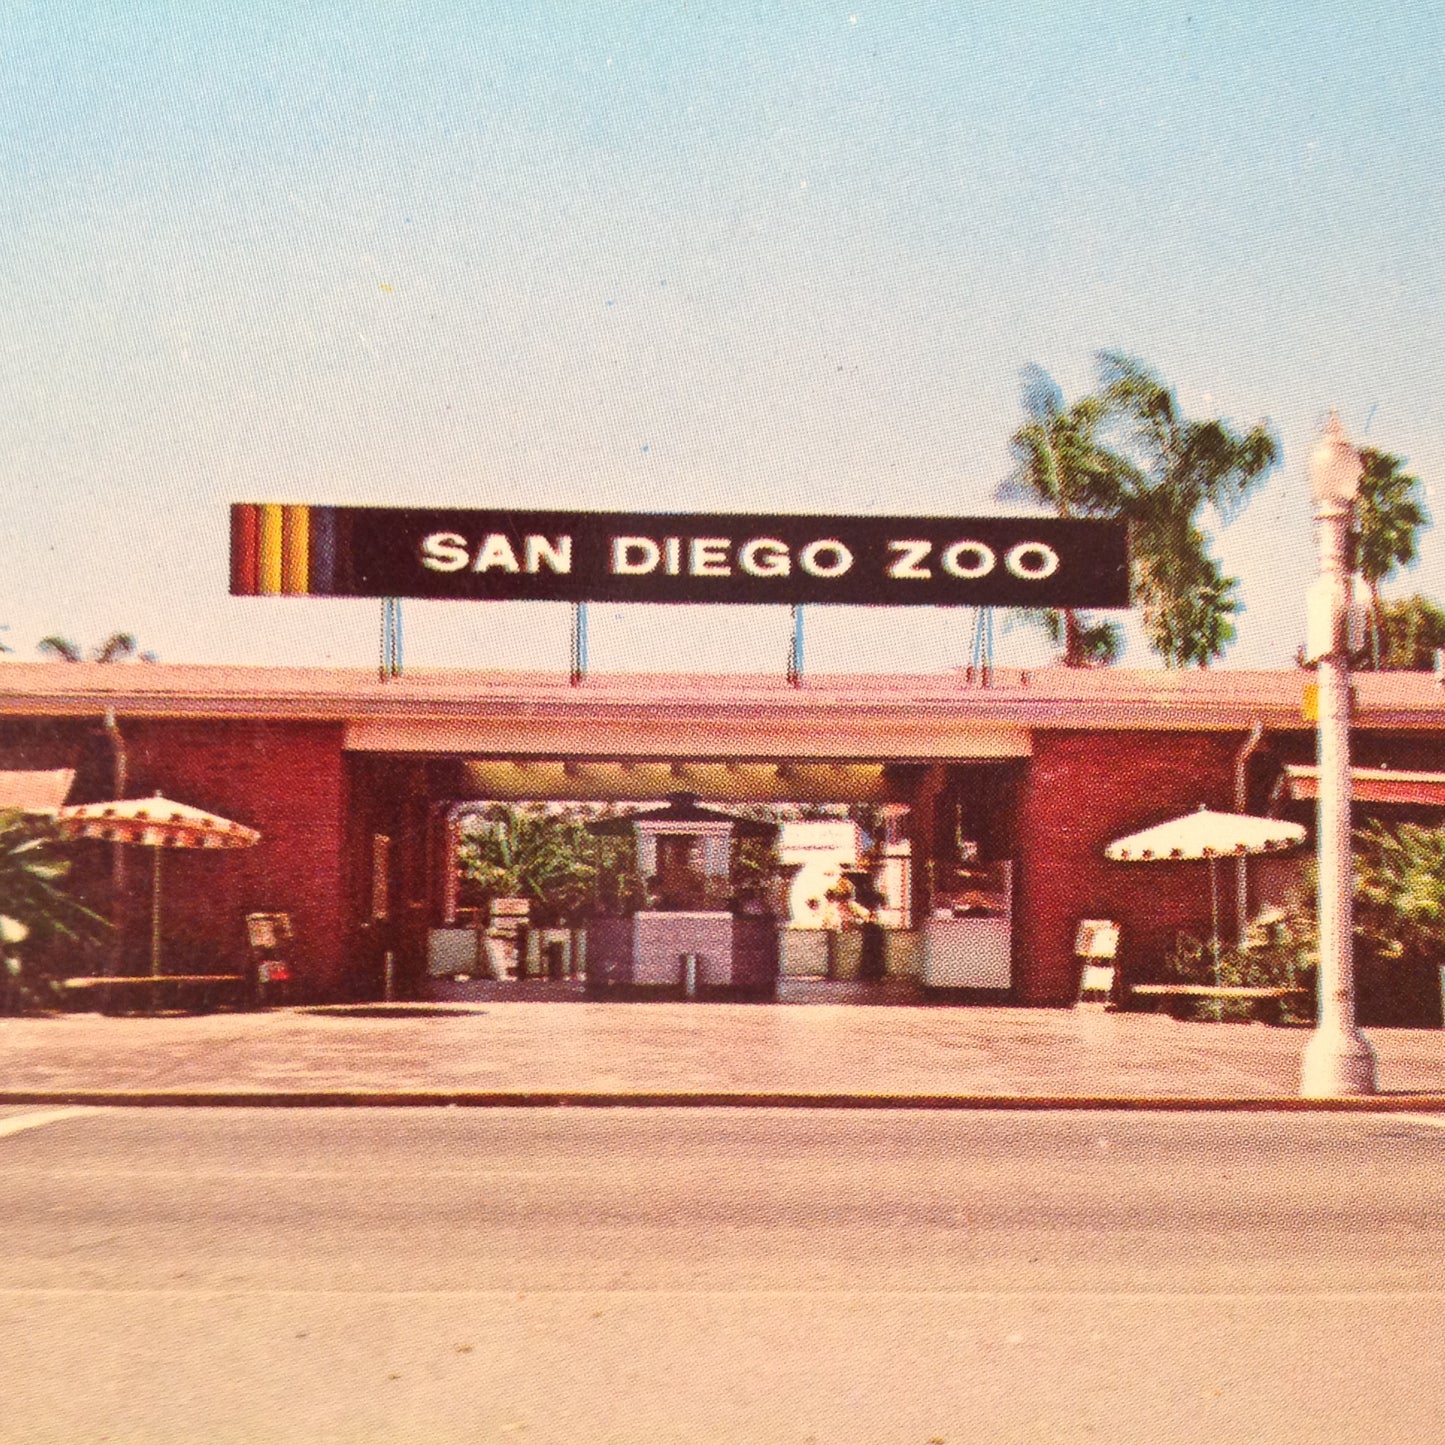 Vintage Color Series from the San Diego Zoo Souvenir Color Postcard Bldg 2 Entrance to the Zoo San Diego California